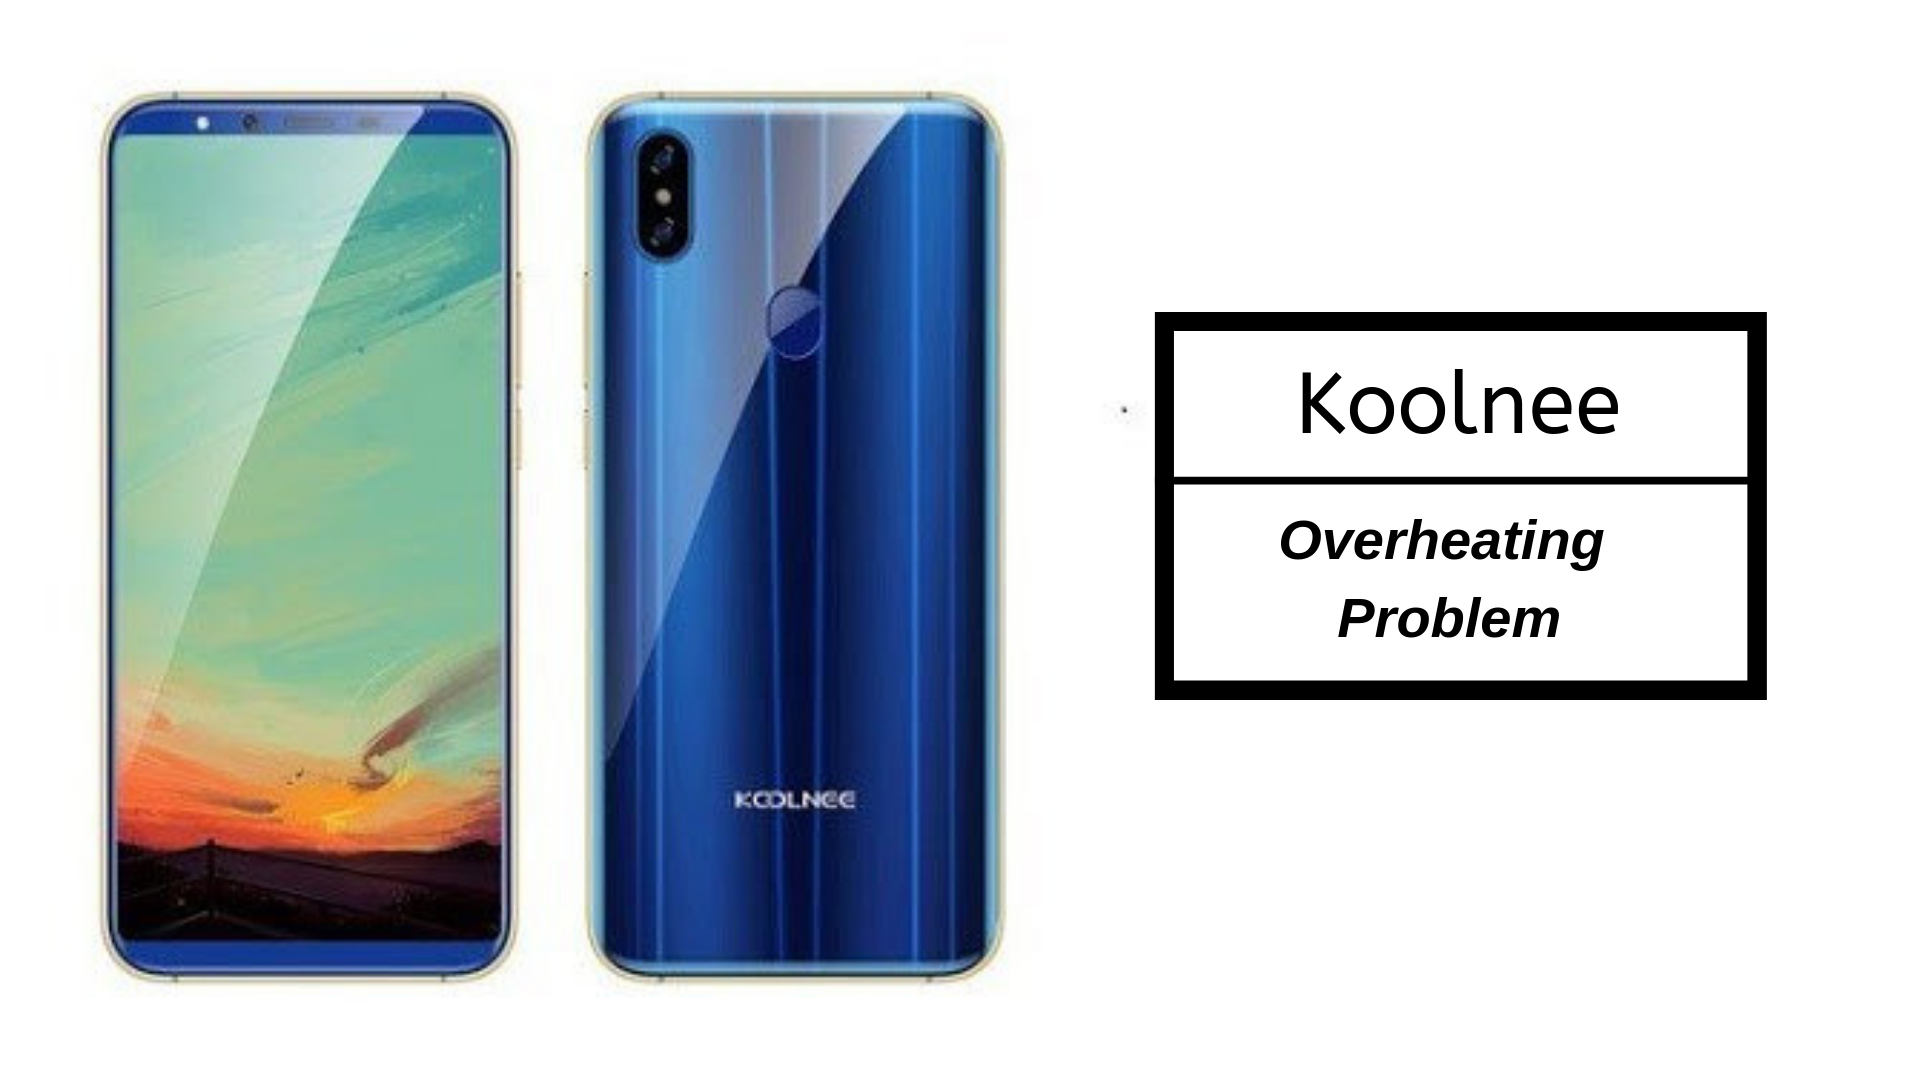 How To Fix Koolnee Overheating Problem - Troubleshooting Fix & Tips